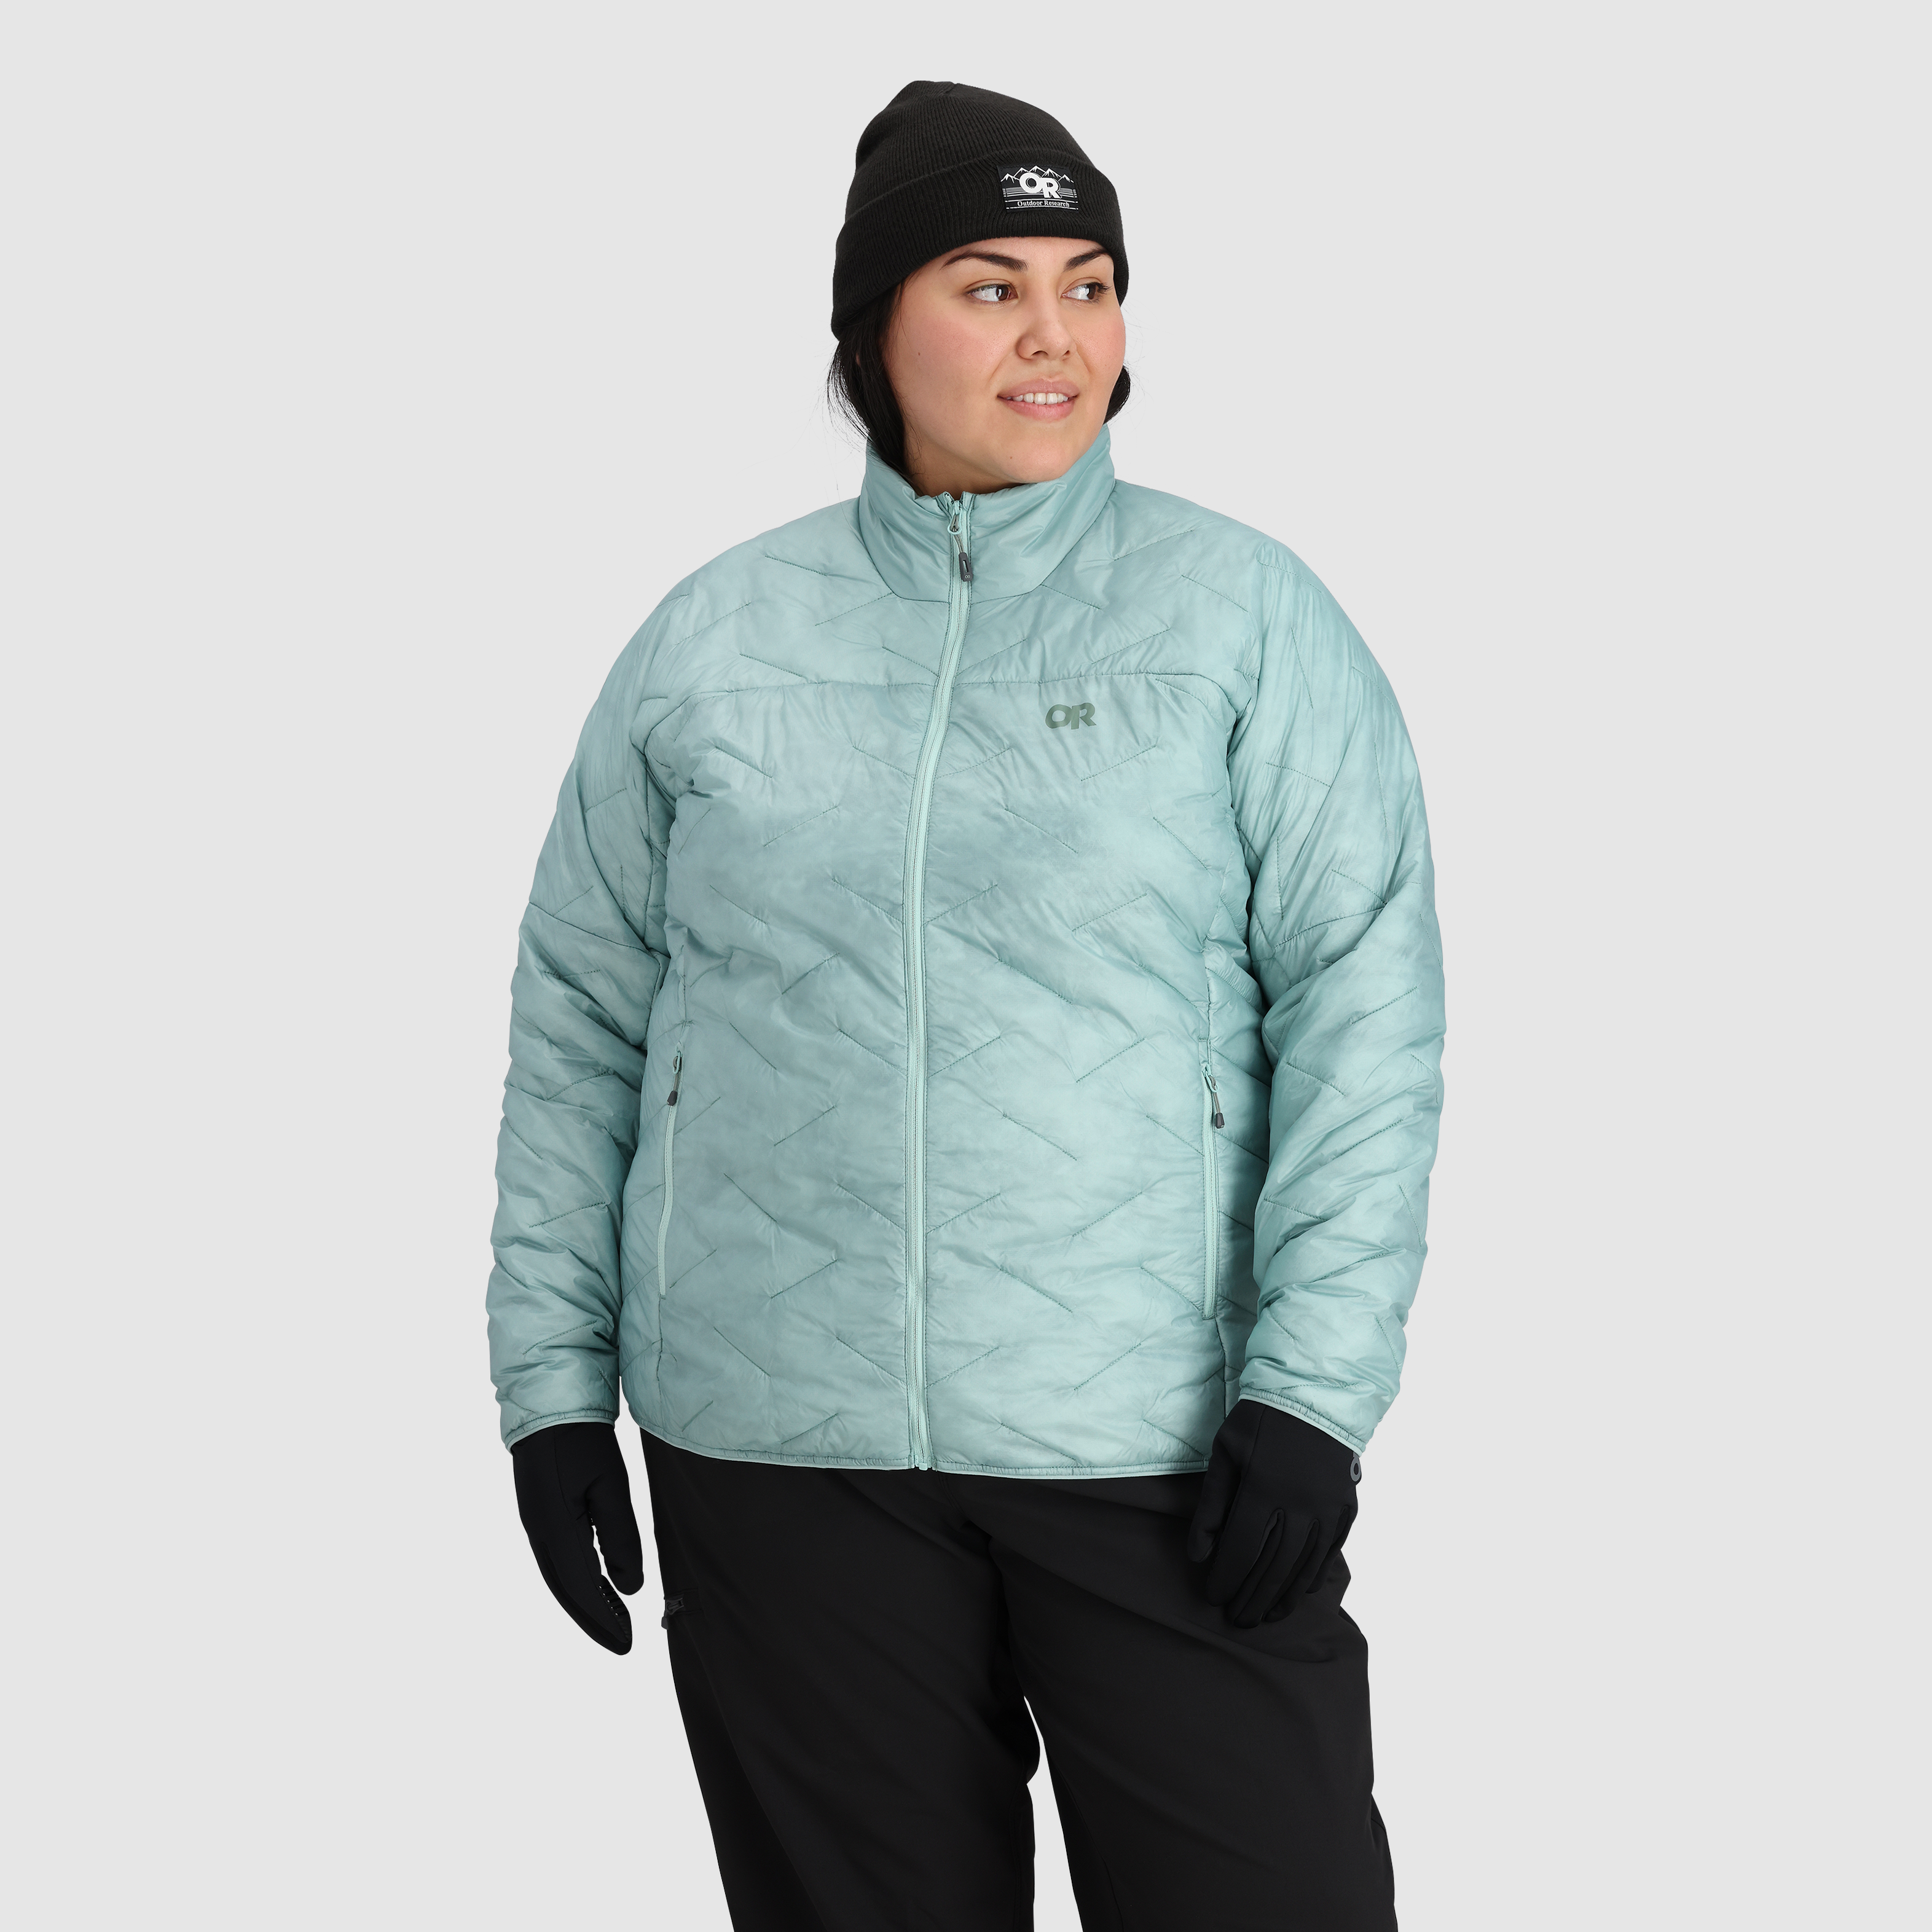 Snow Country Outerwear Women's Plus Extended Size Ski Coat Jacket